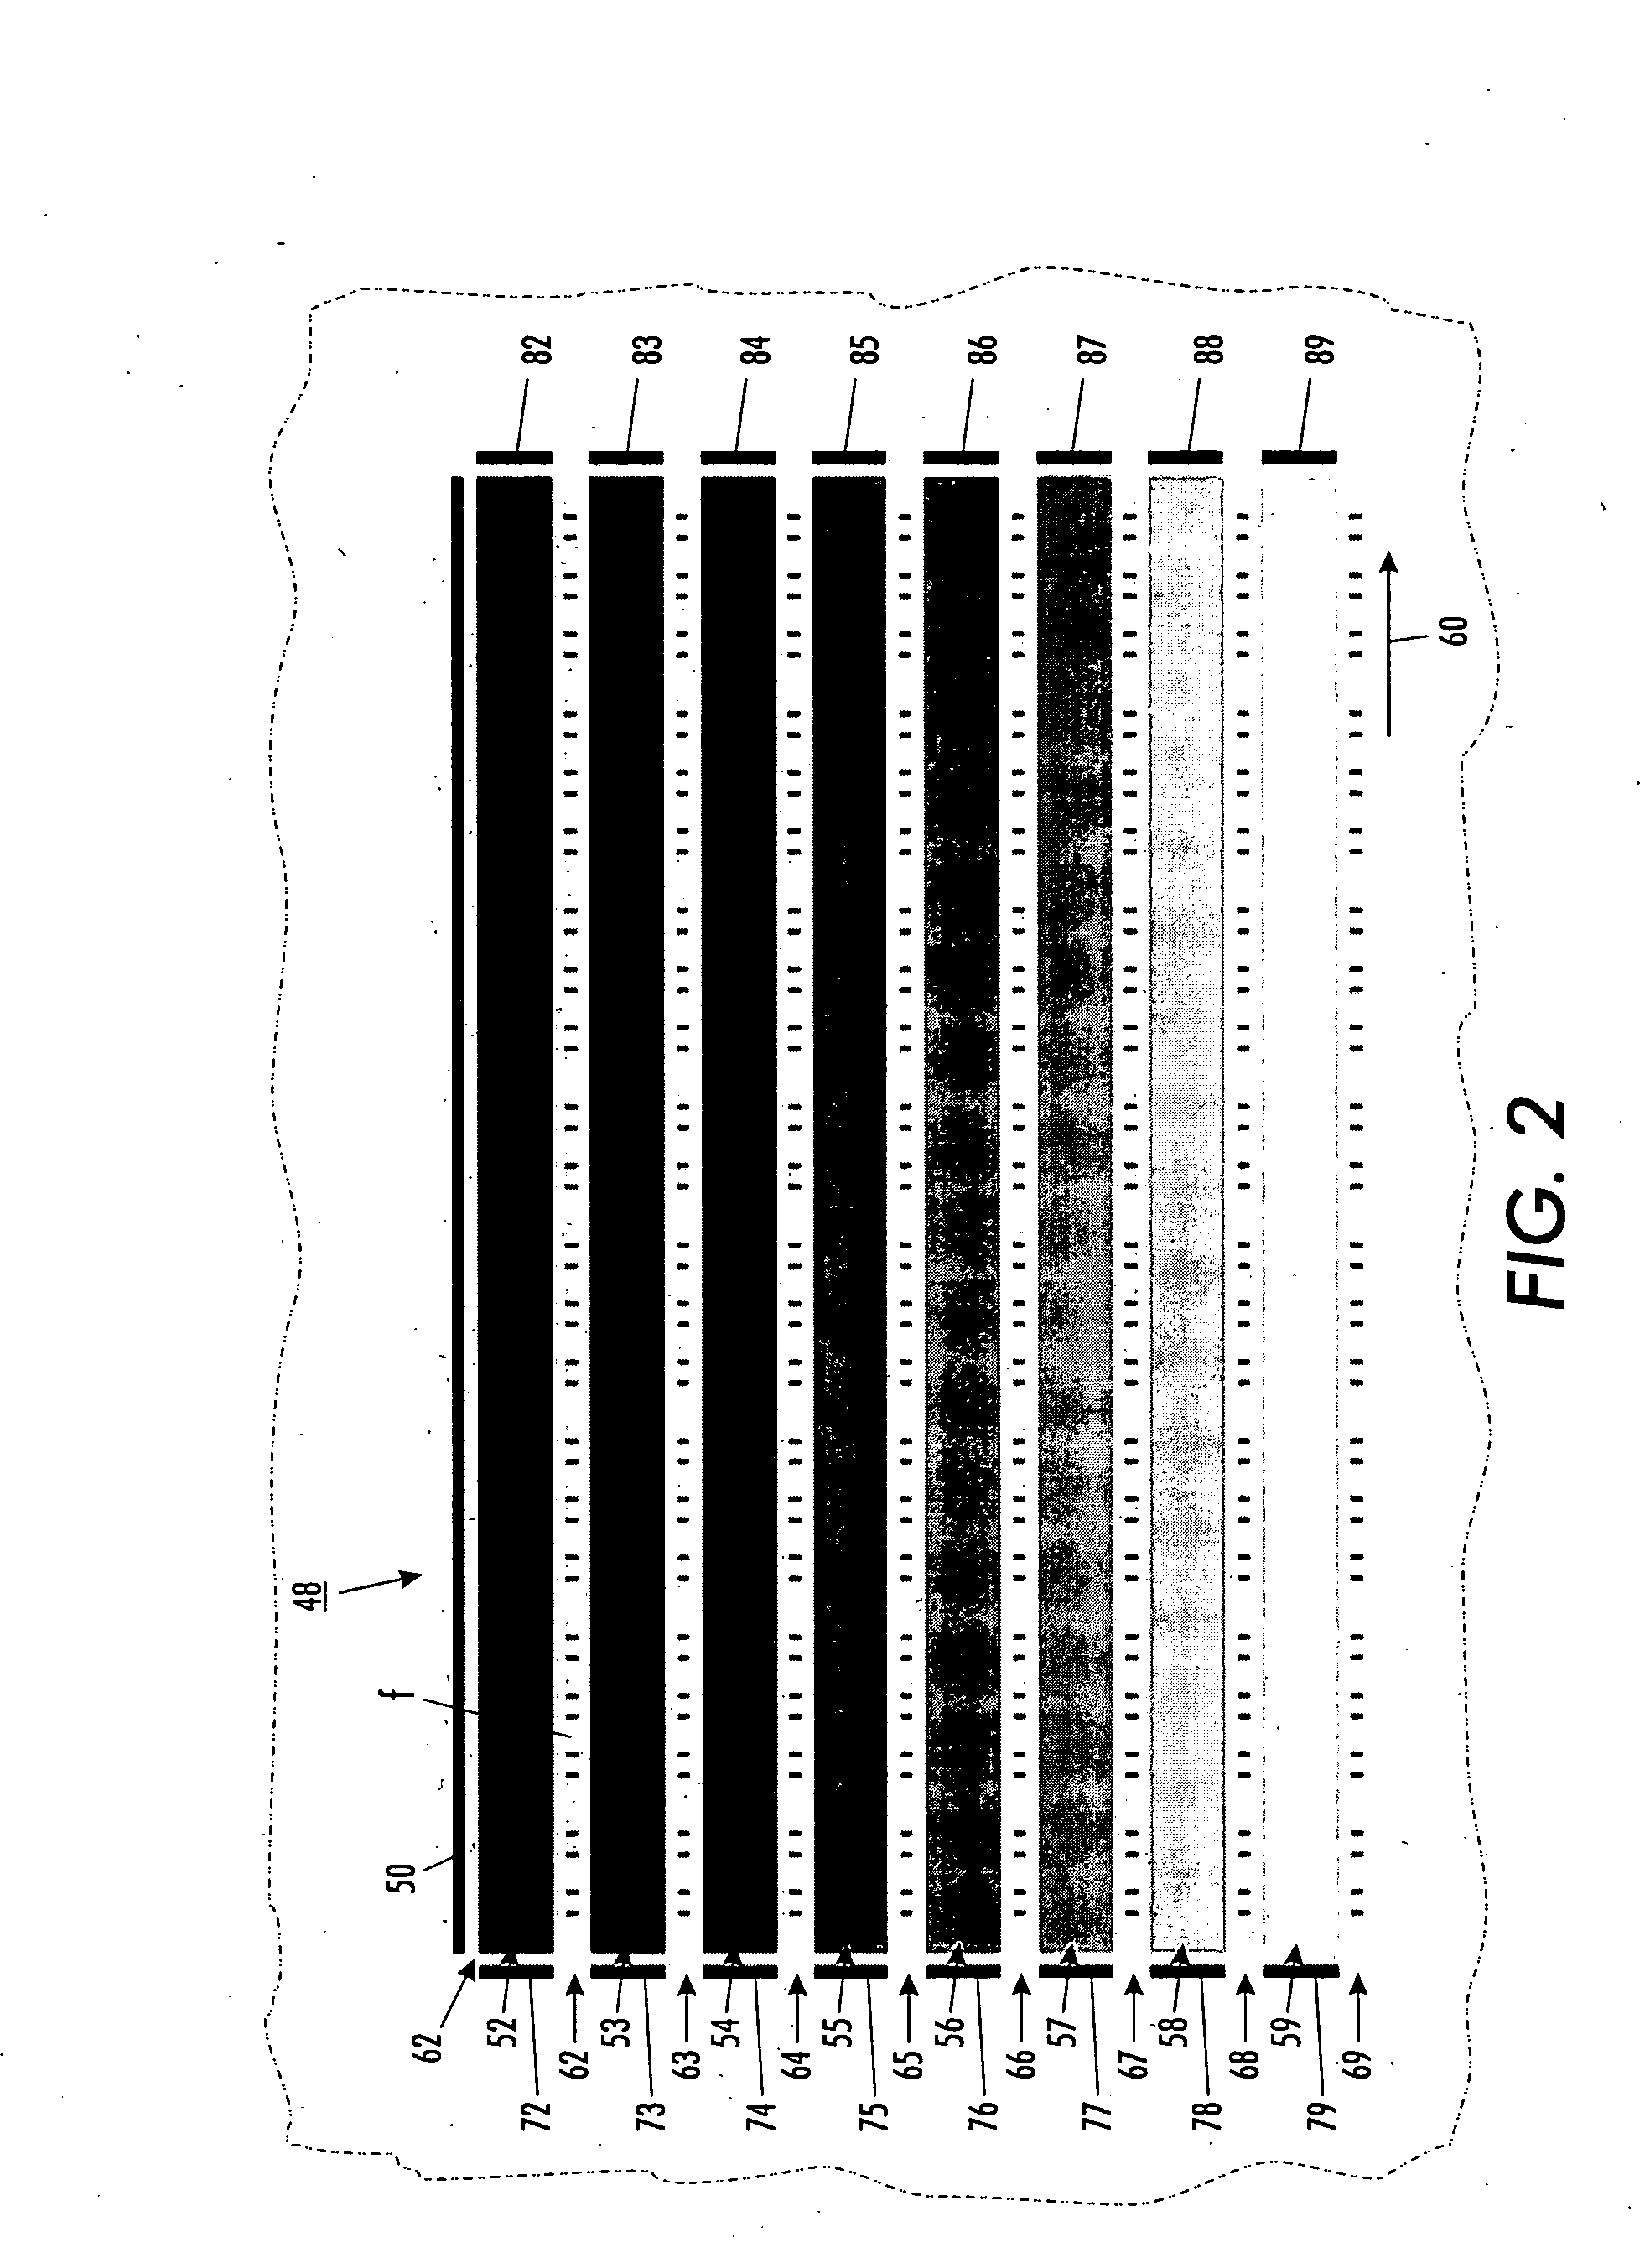 Systems and methods for measuring uniformity in images